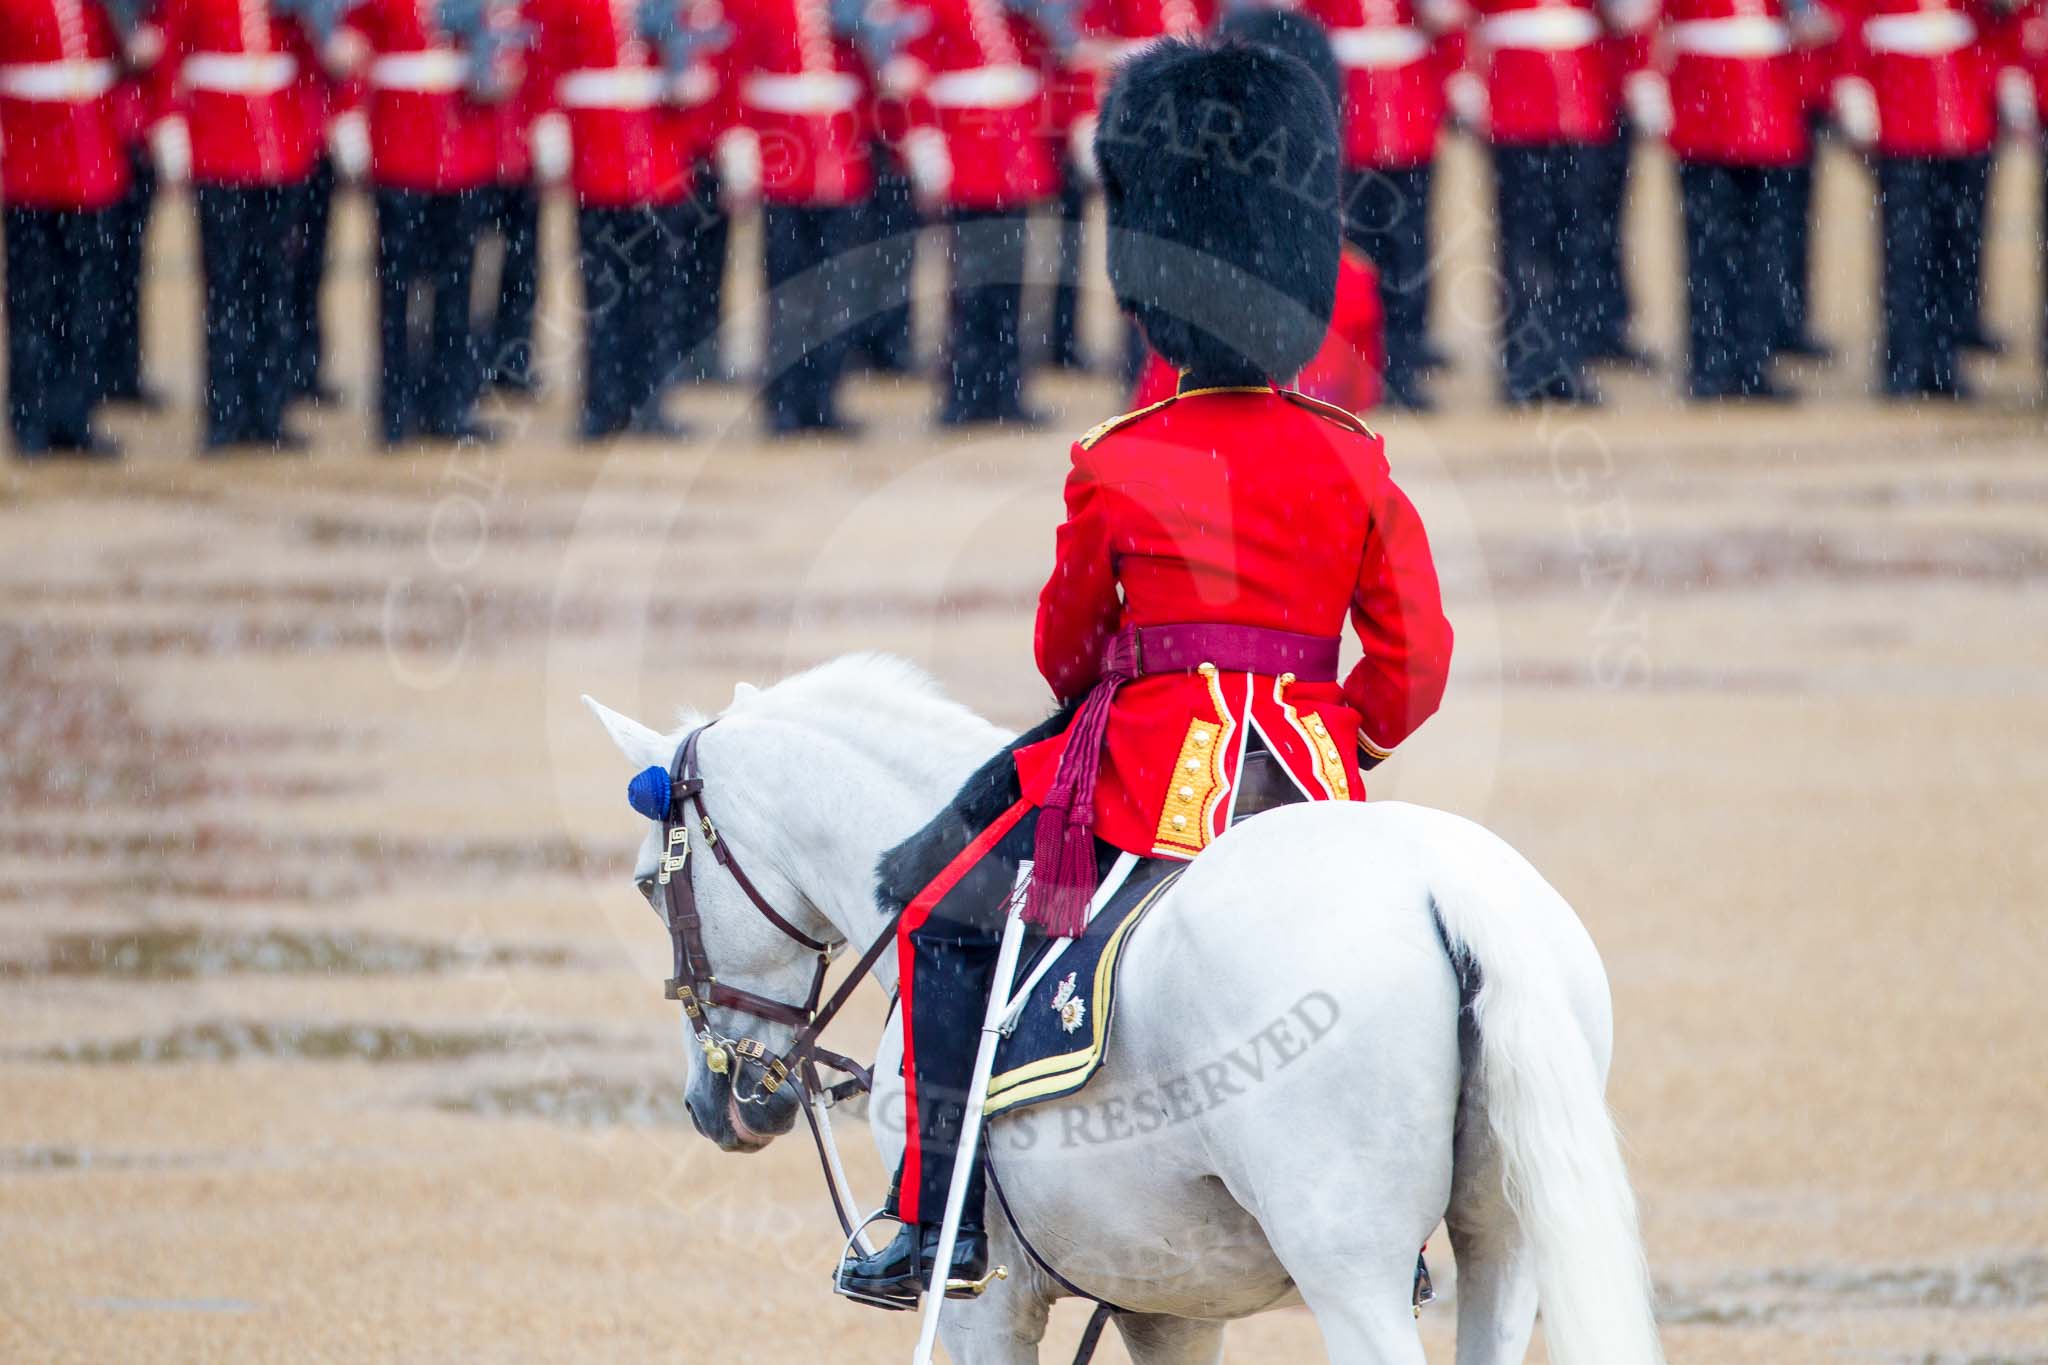 The Colonel's Review 2014.
Horse Guards Parade, Westminster,
London,

United Kingdom,
on 07 June 2014 at 10:37, image #153